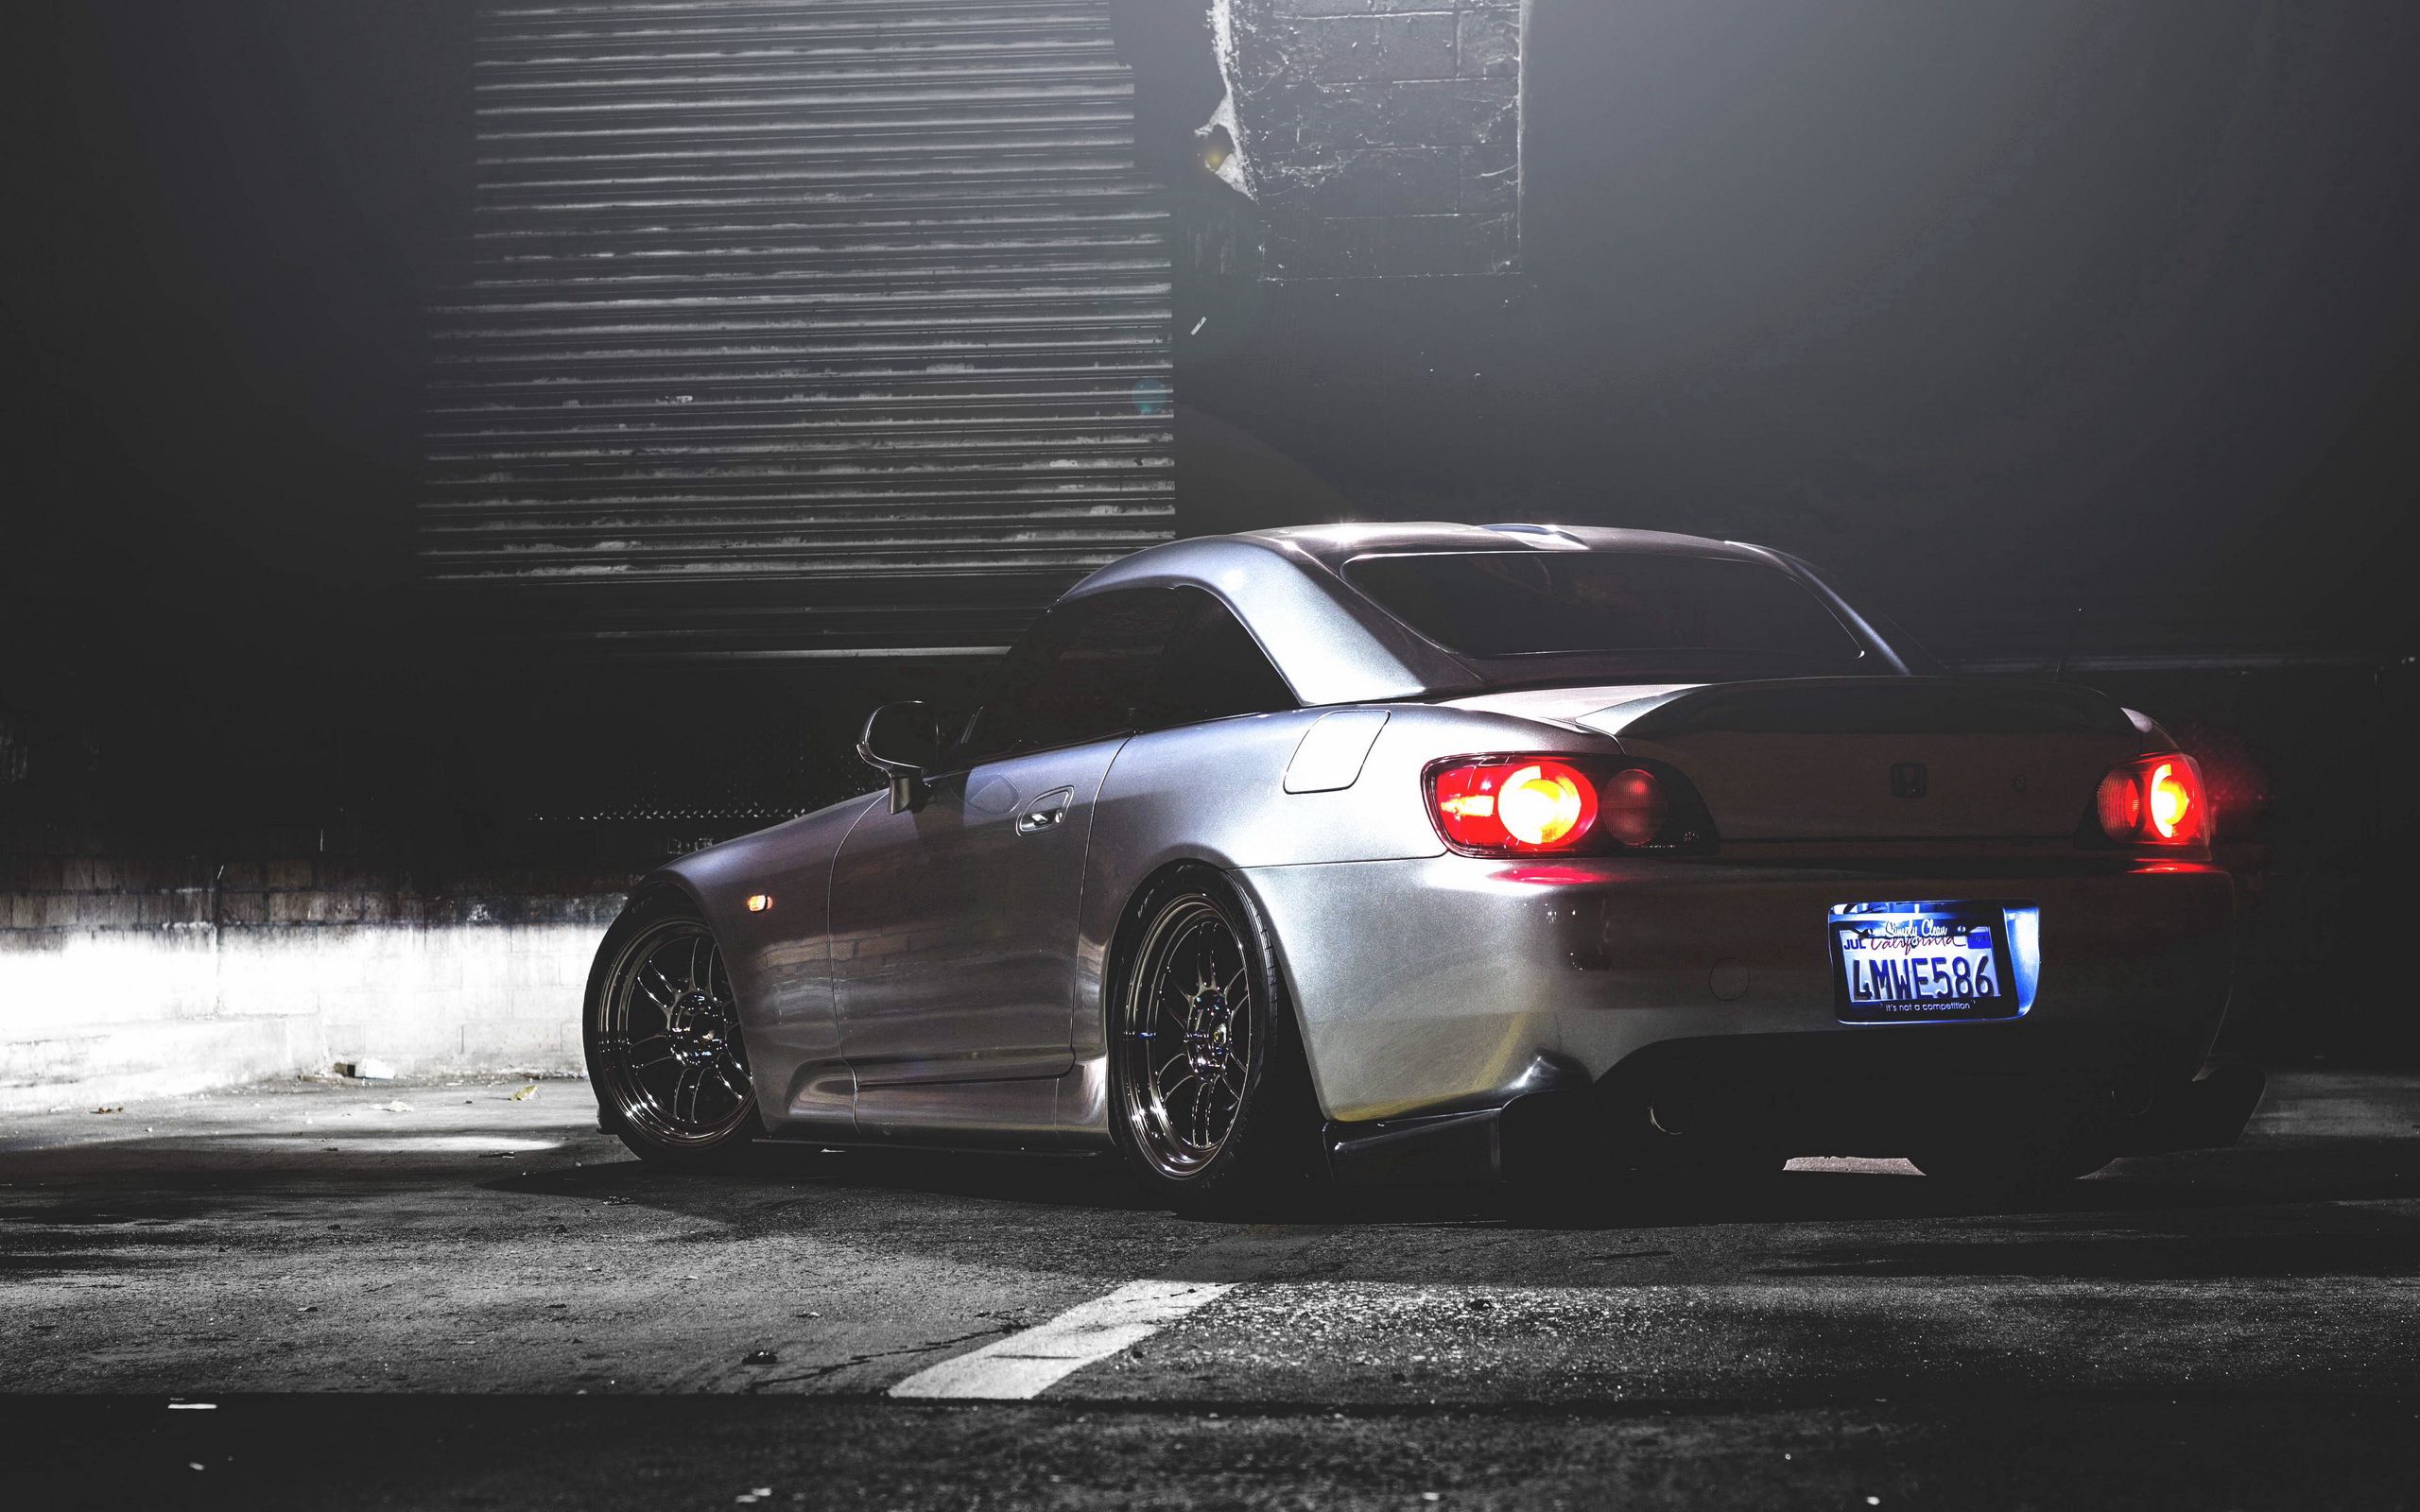 cars, night, back view, honda s2000 collection of HD images